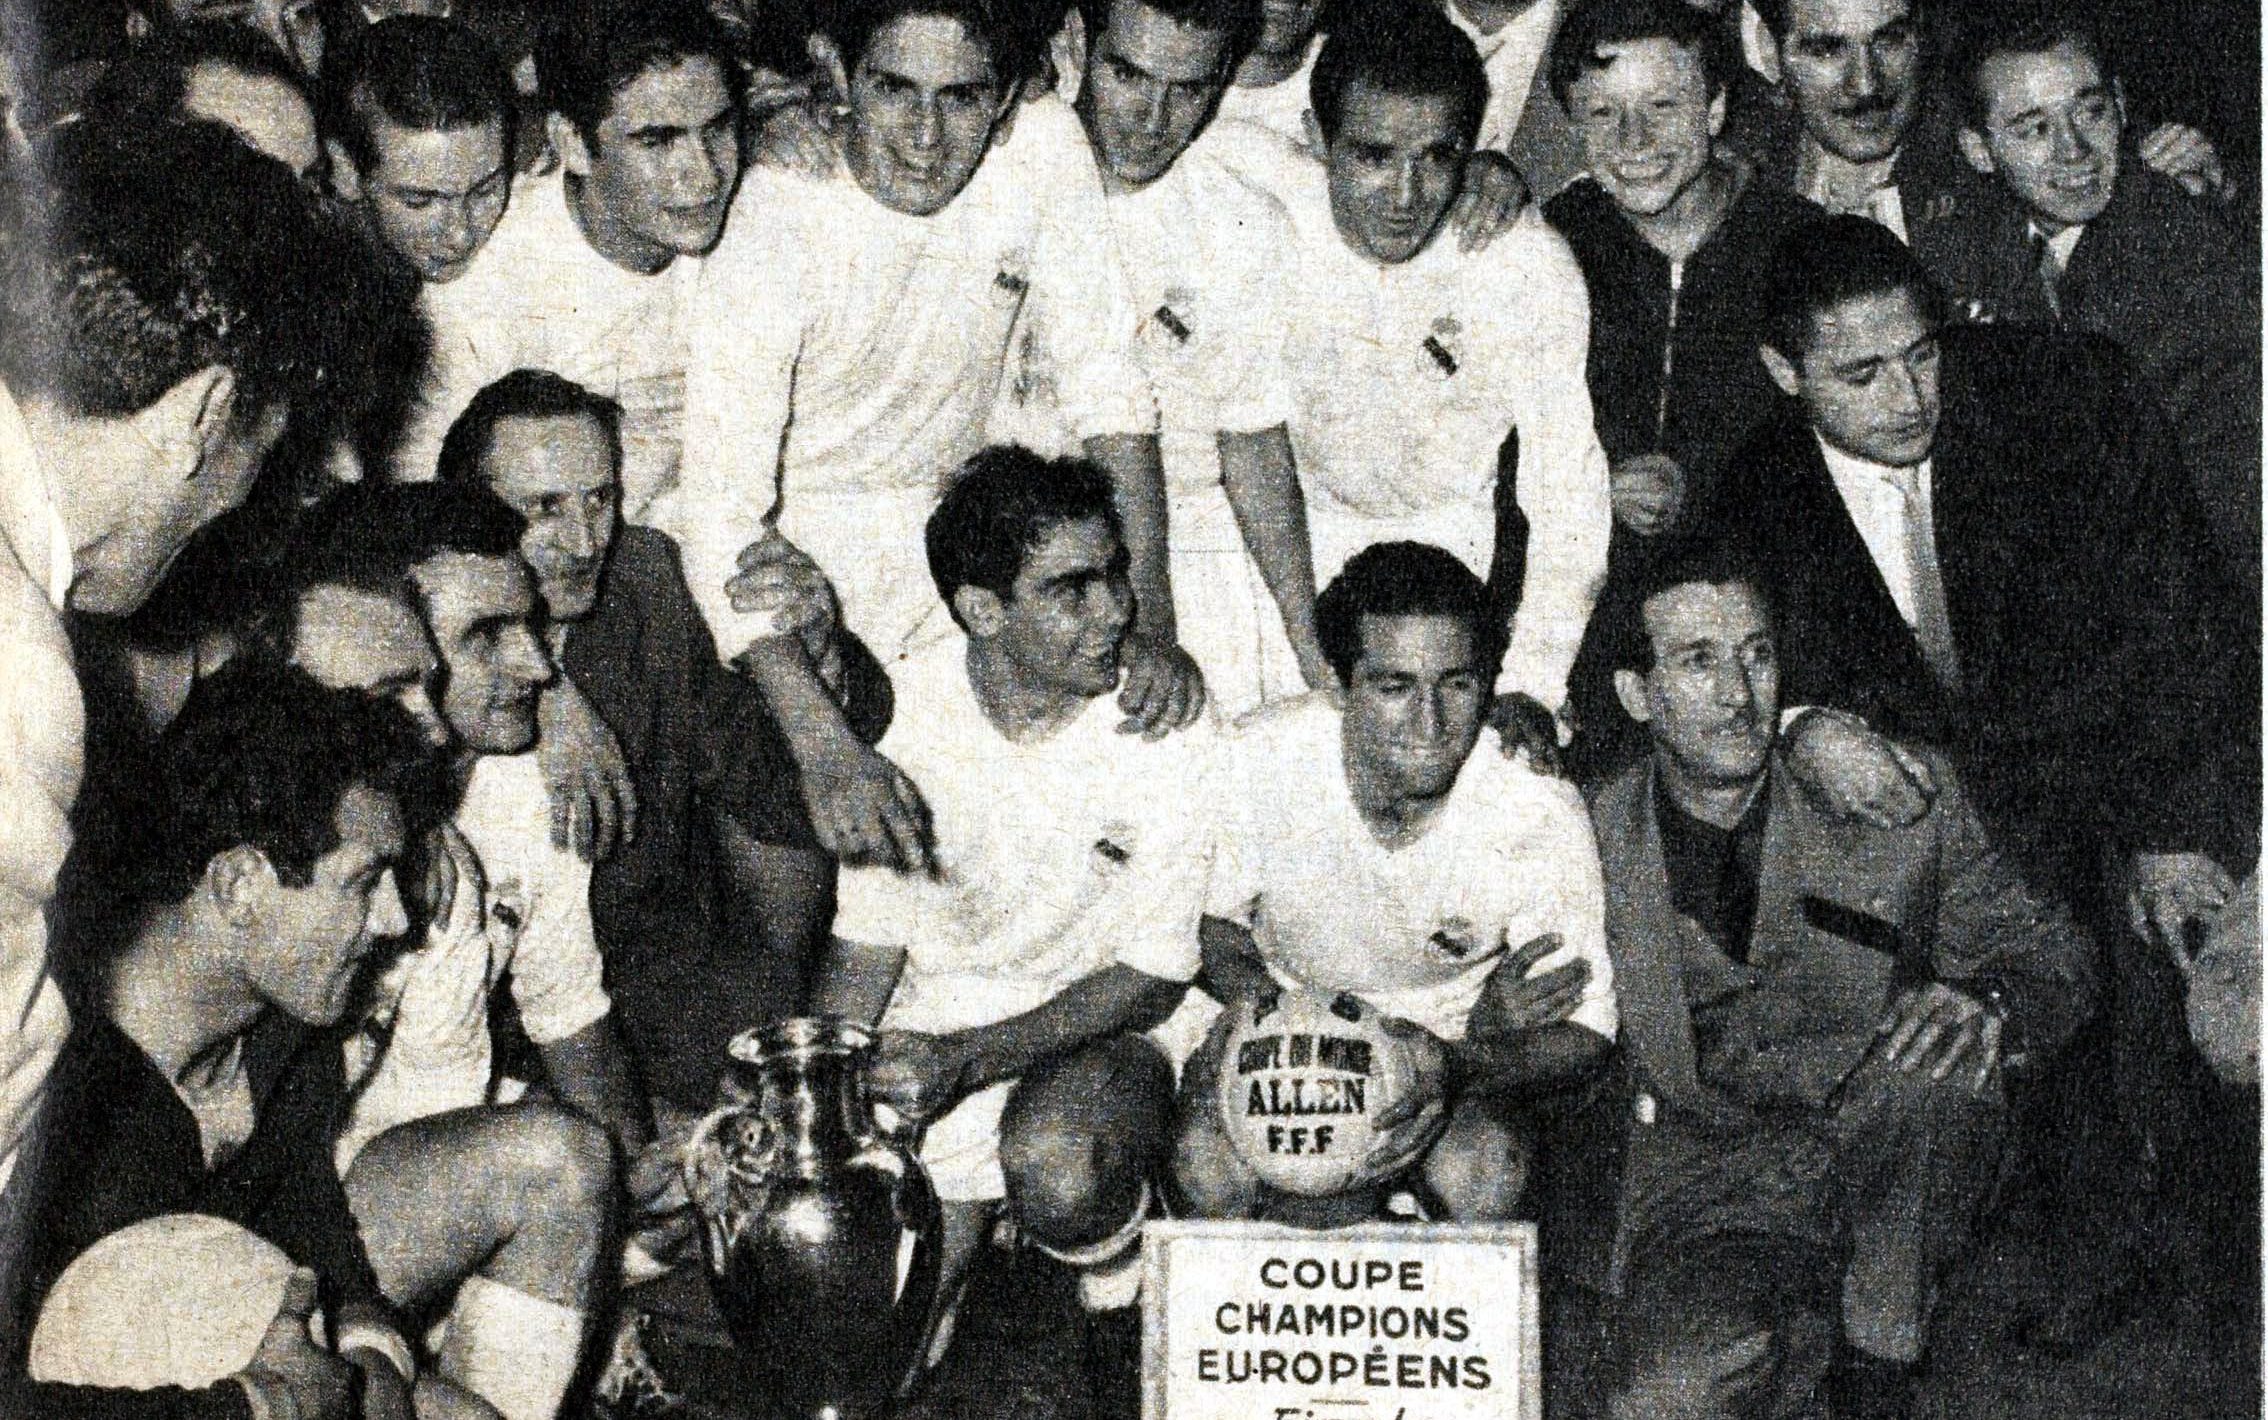 a battle real madrid’s soul – with 122 years of history at stake